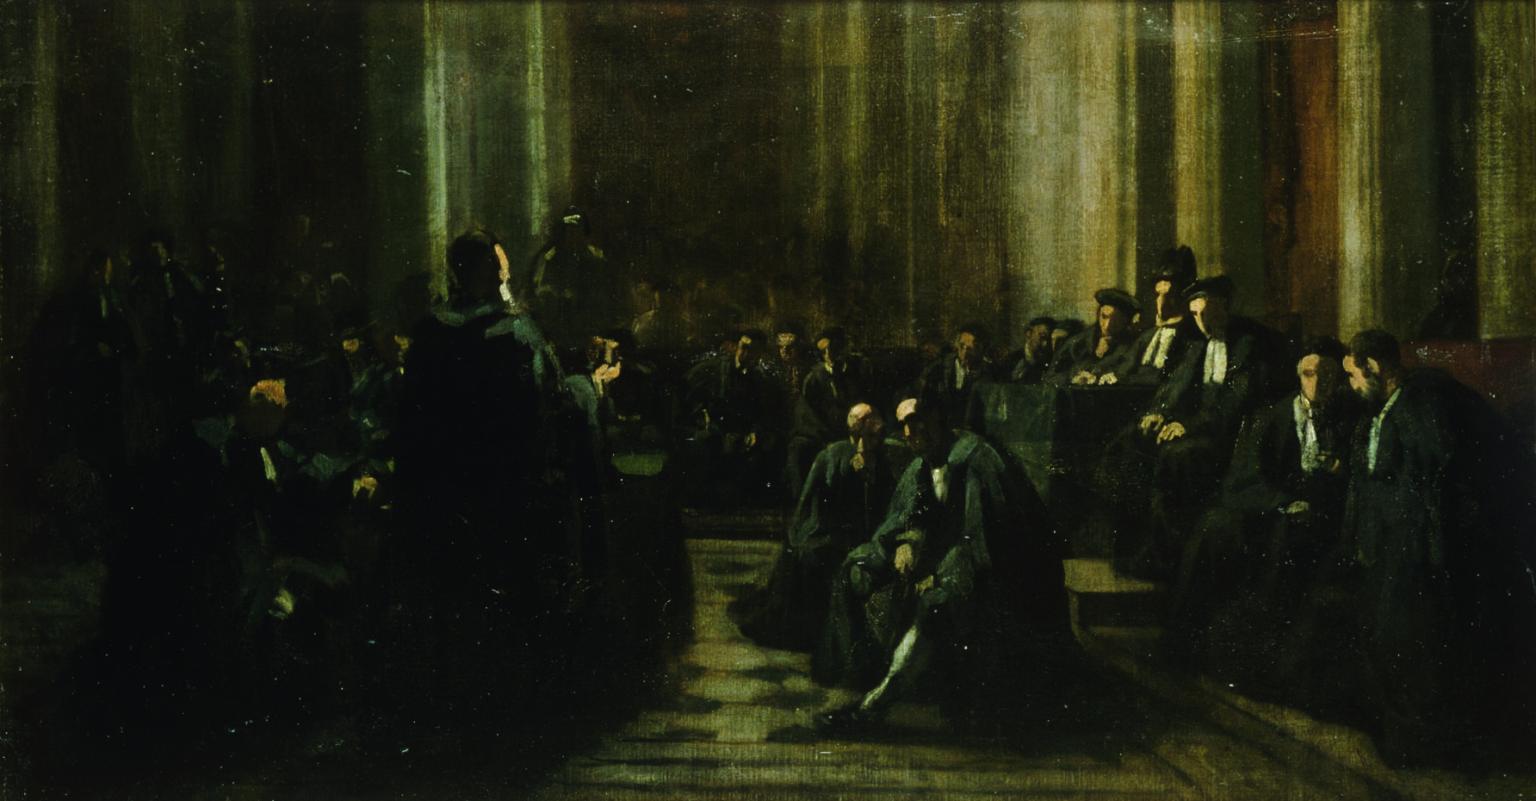 Painting of men seated in dark room and one central figure standing.